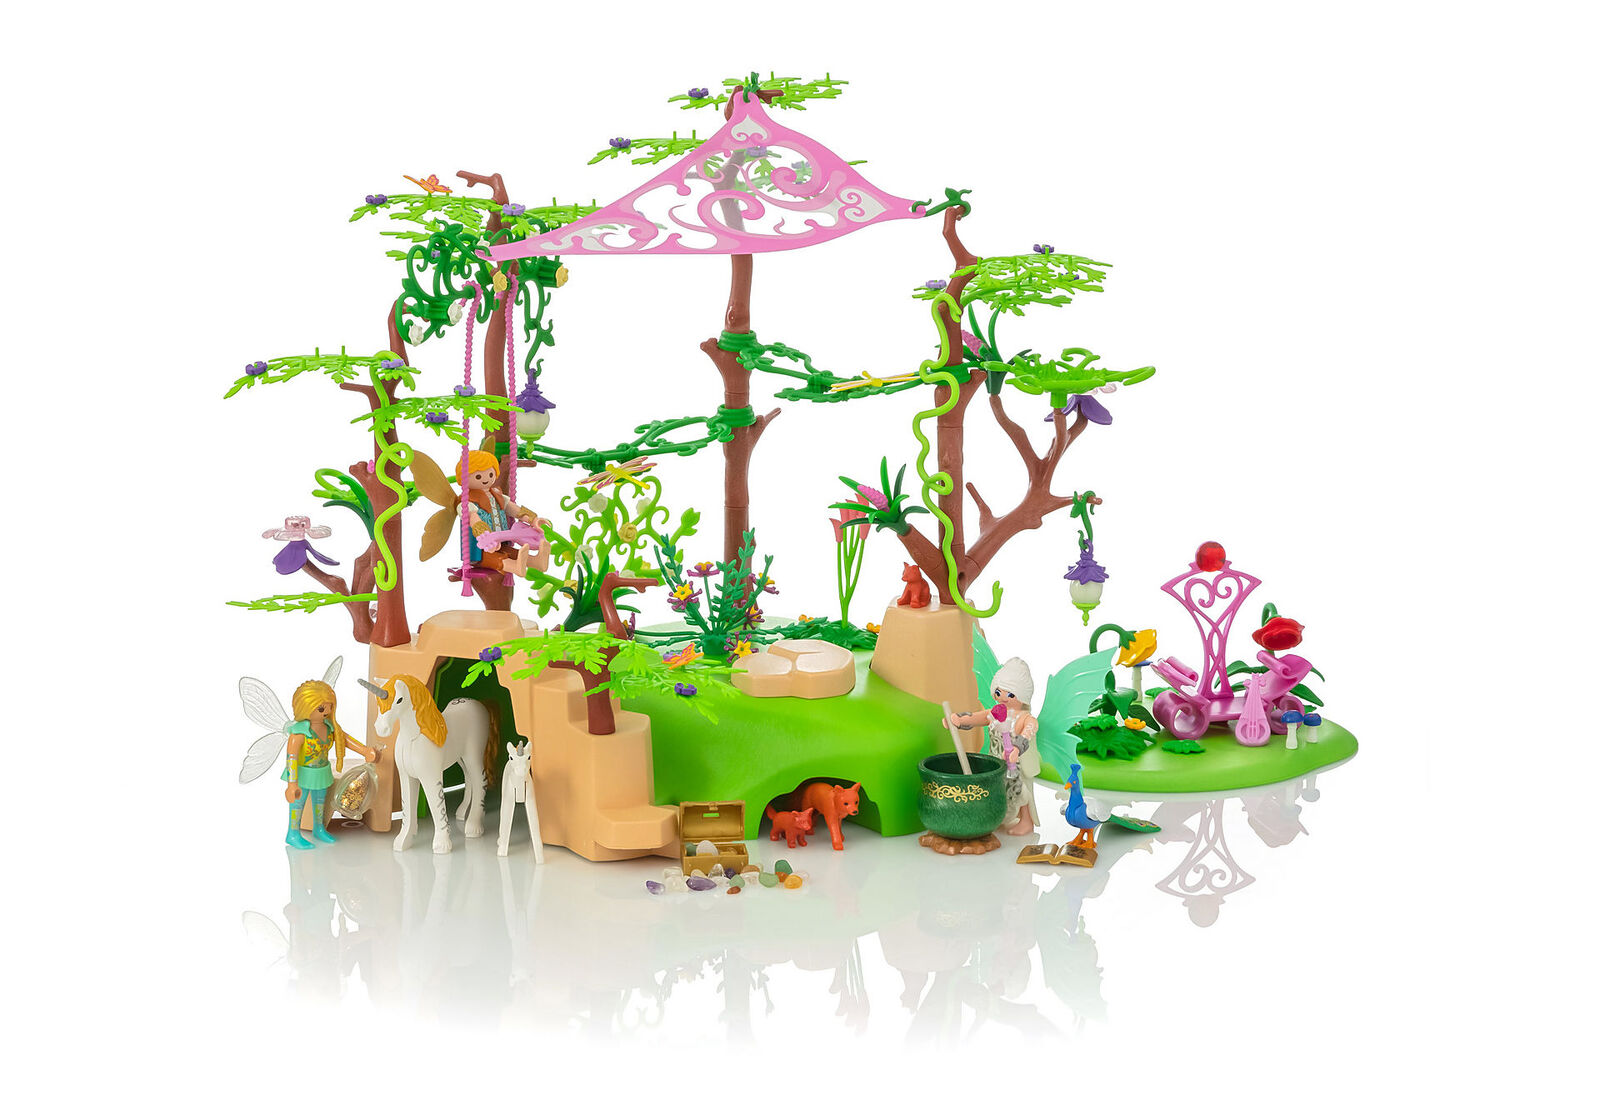 playmobil magical fairy forest playset